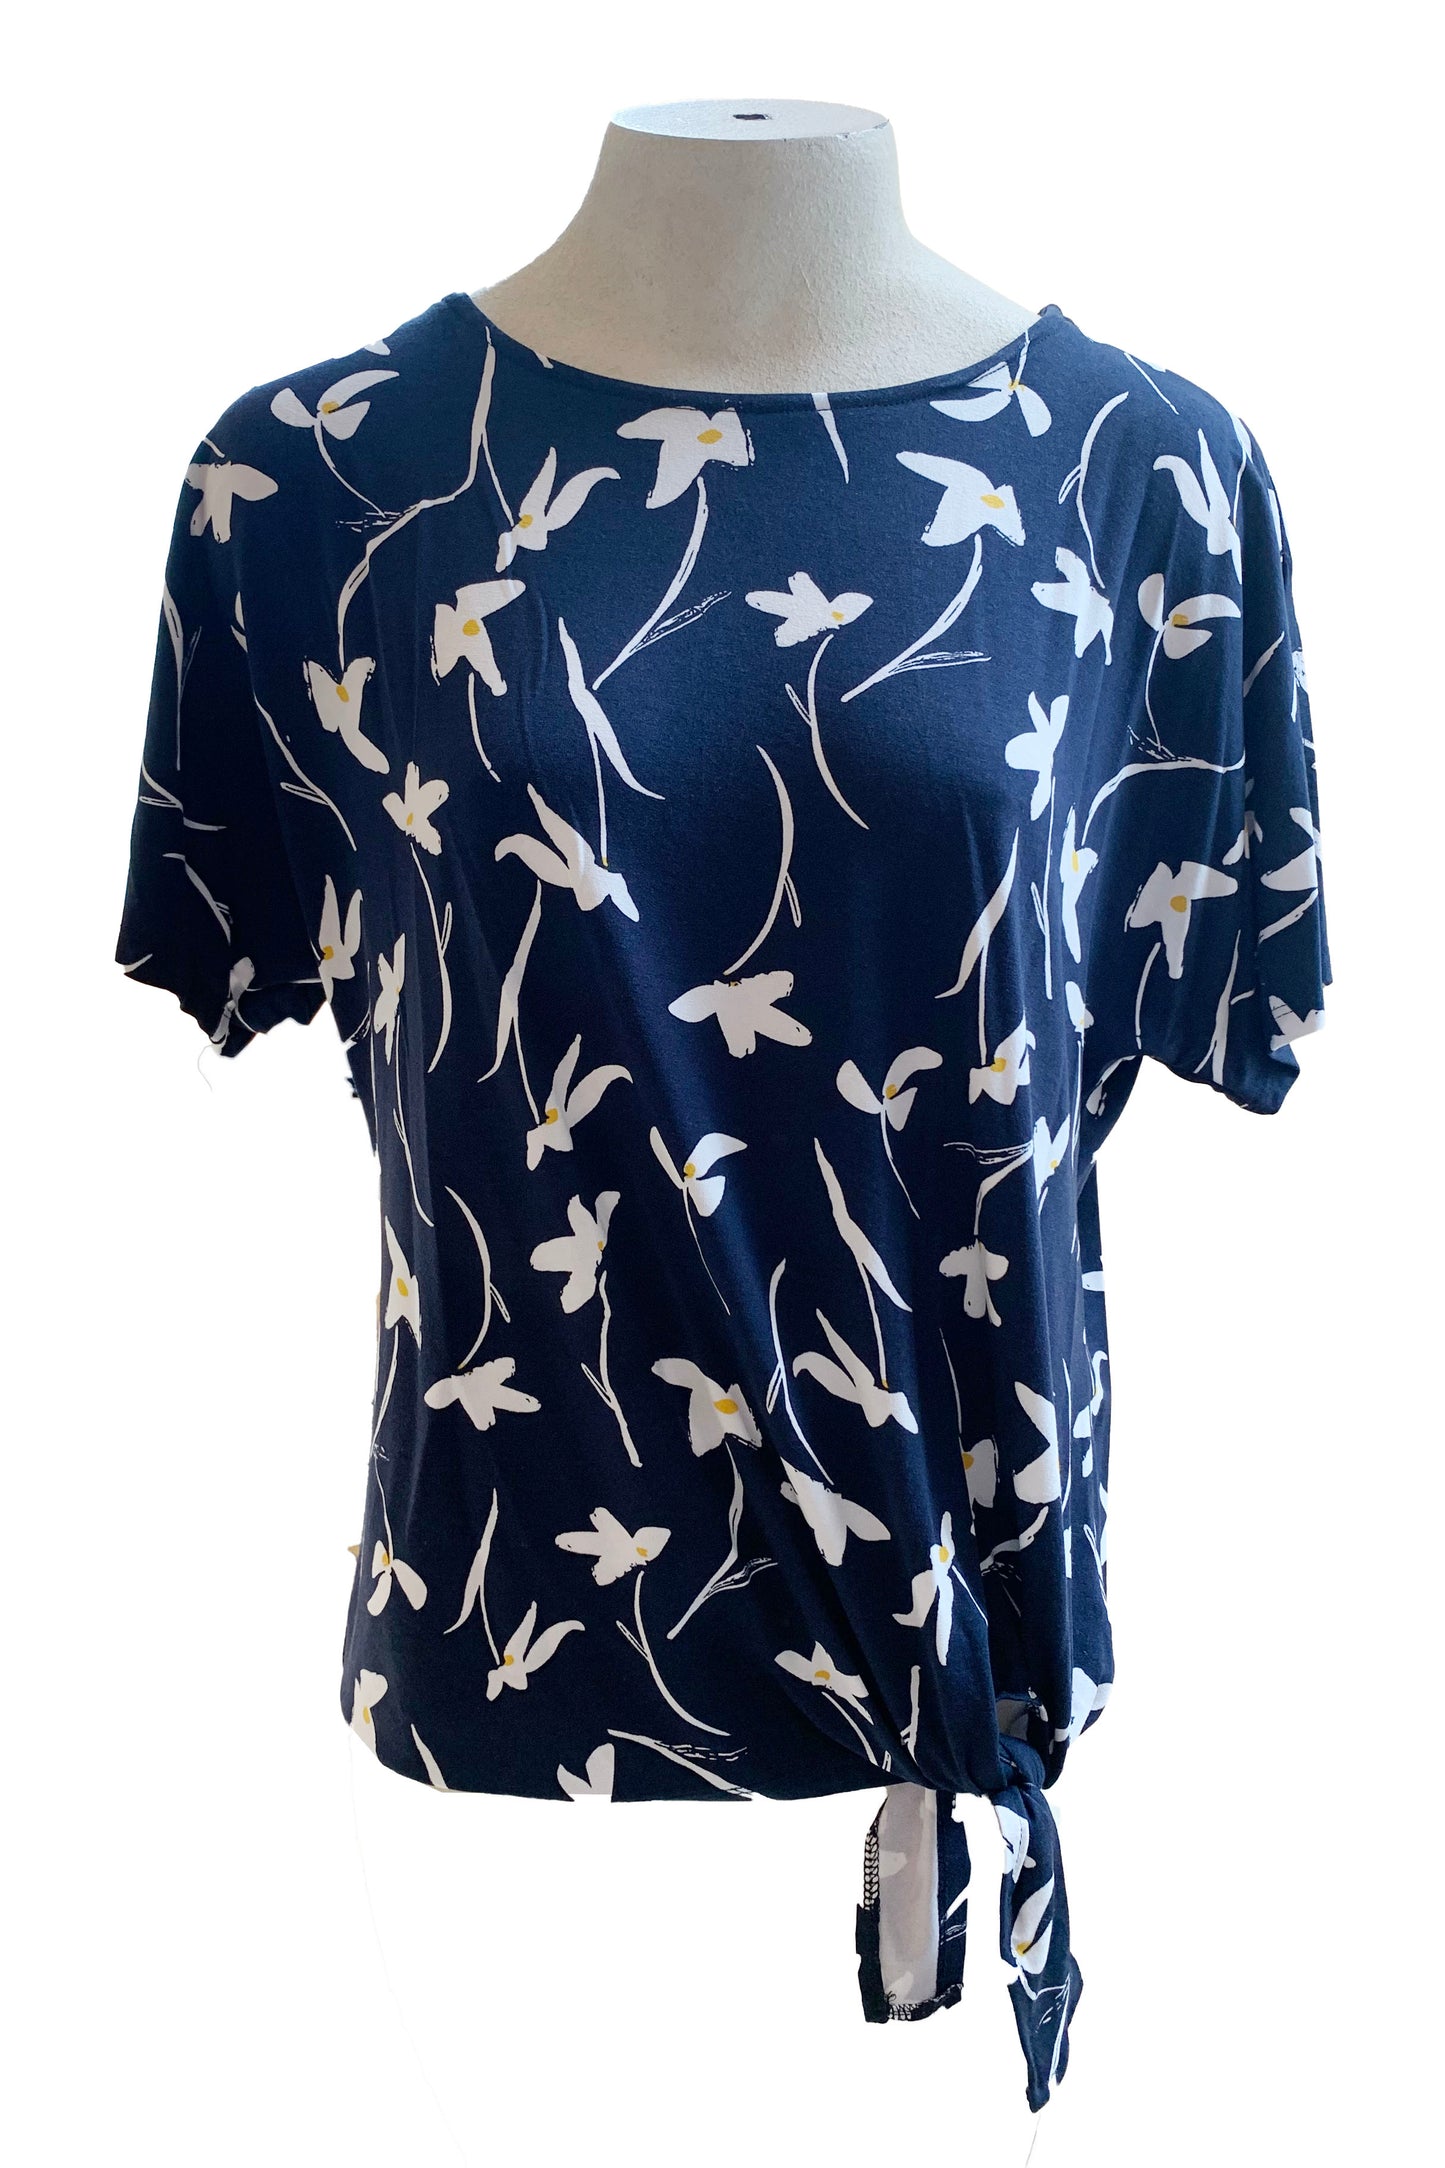 The Carter Top by Pure Essence in Navy with a white floral print is shown on a mannequin against a white background 